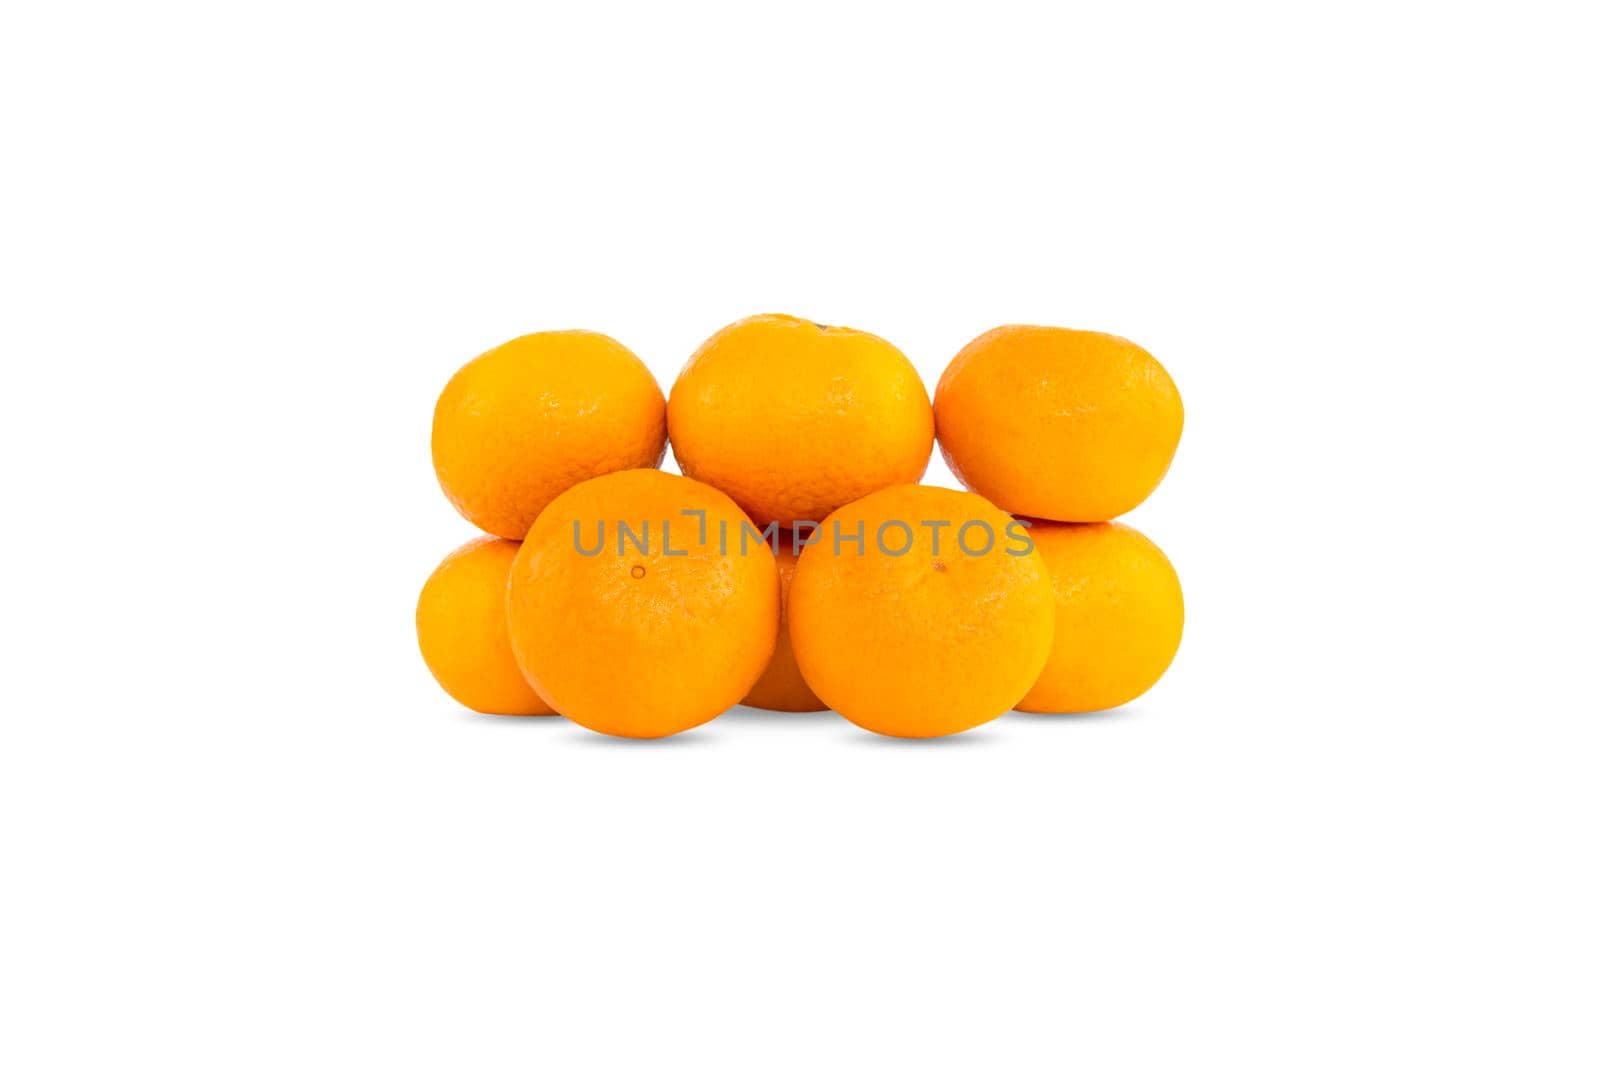 Group of oranges or tangerine isolated on white background by wattanaphob